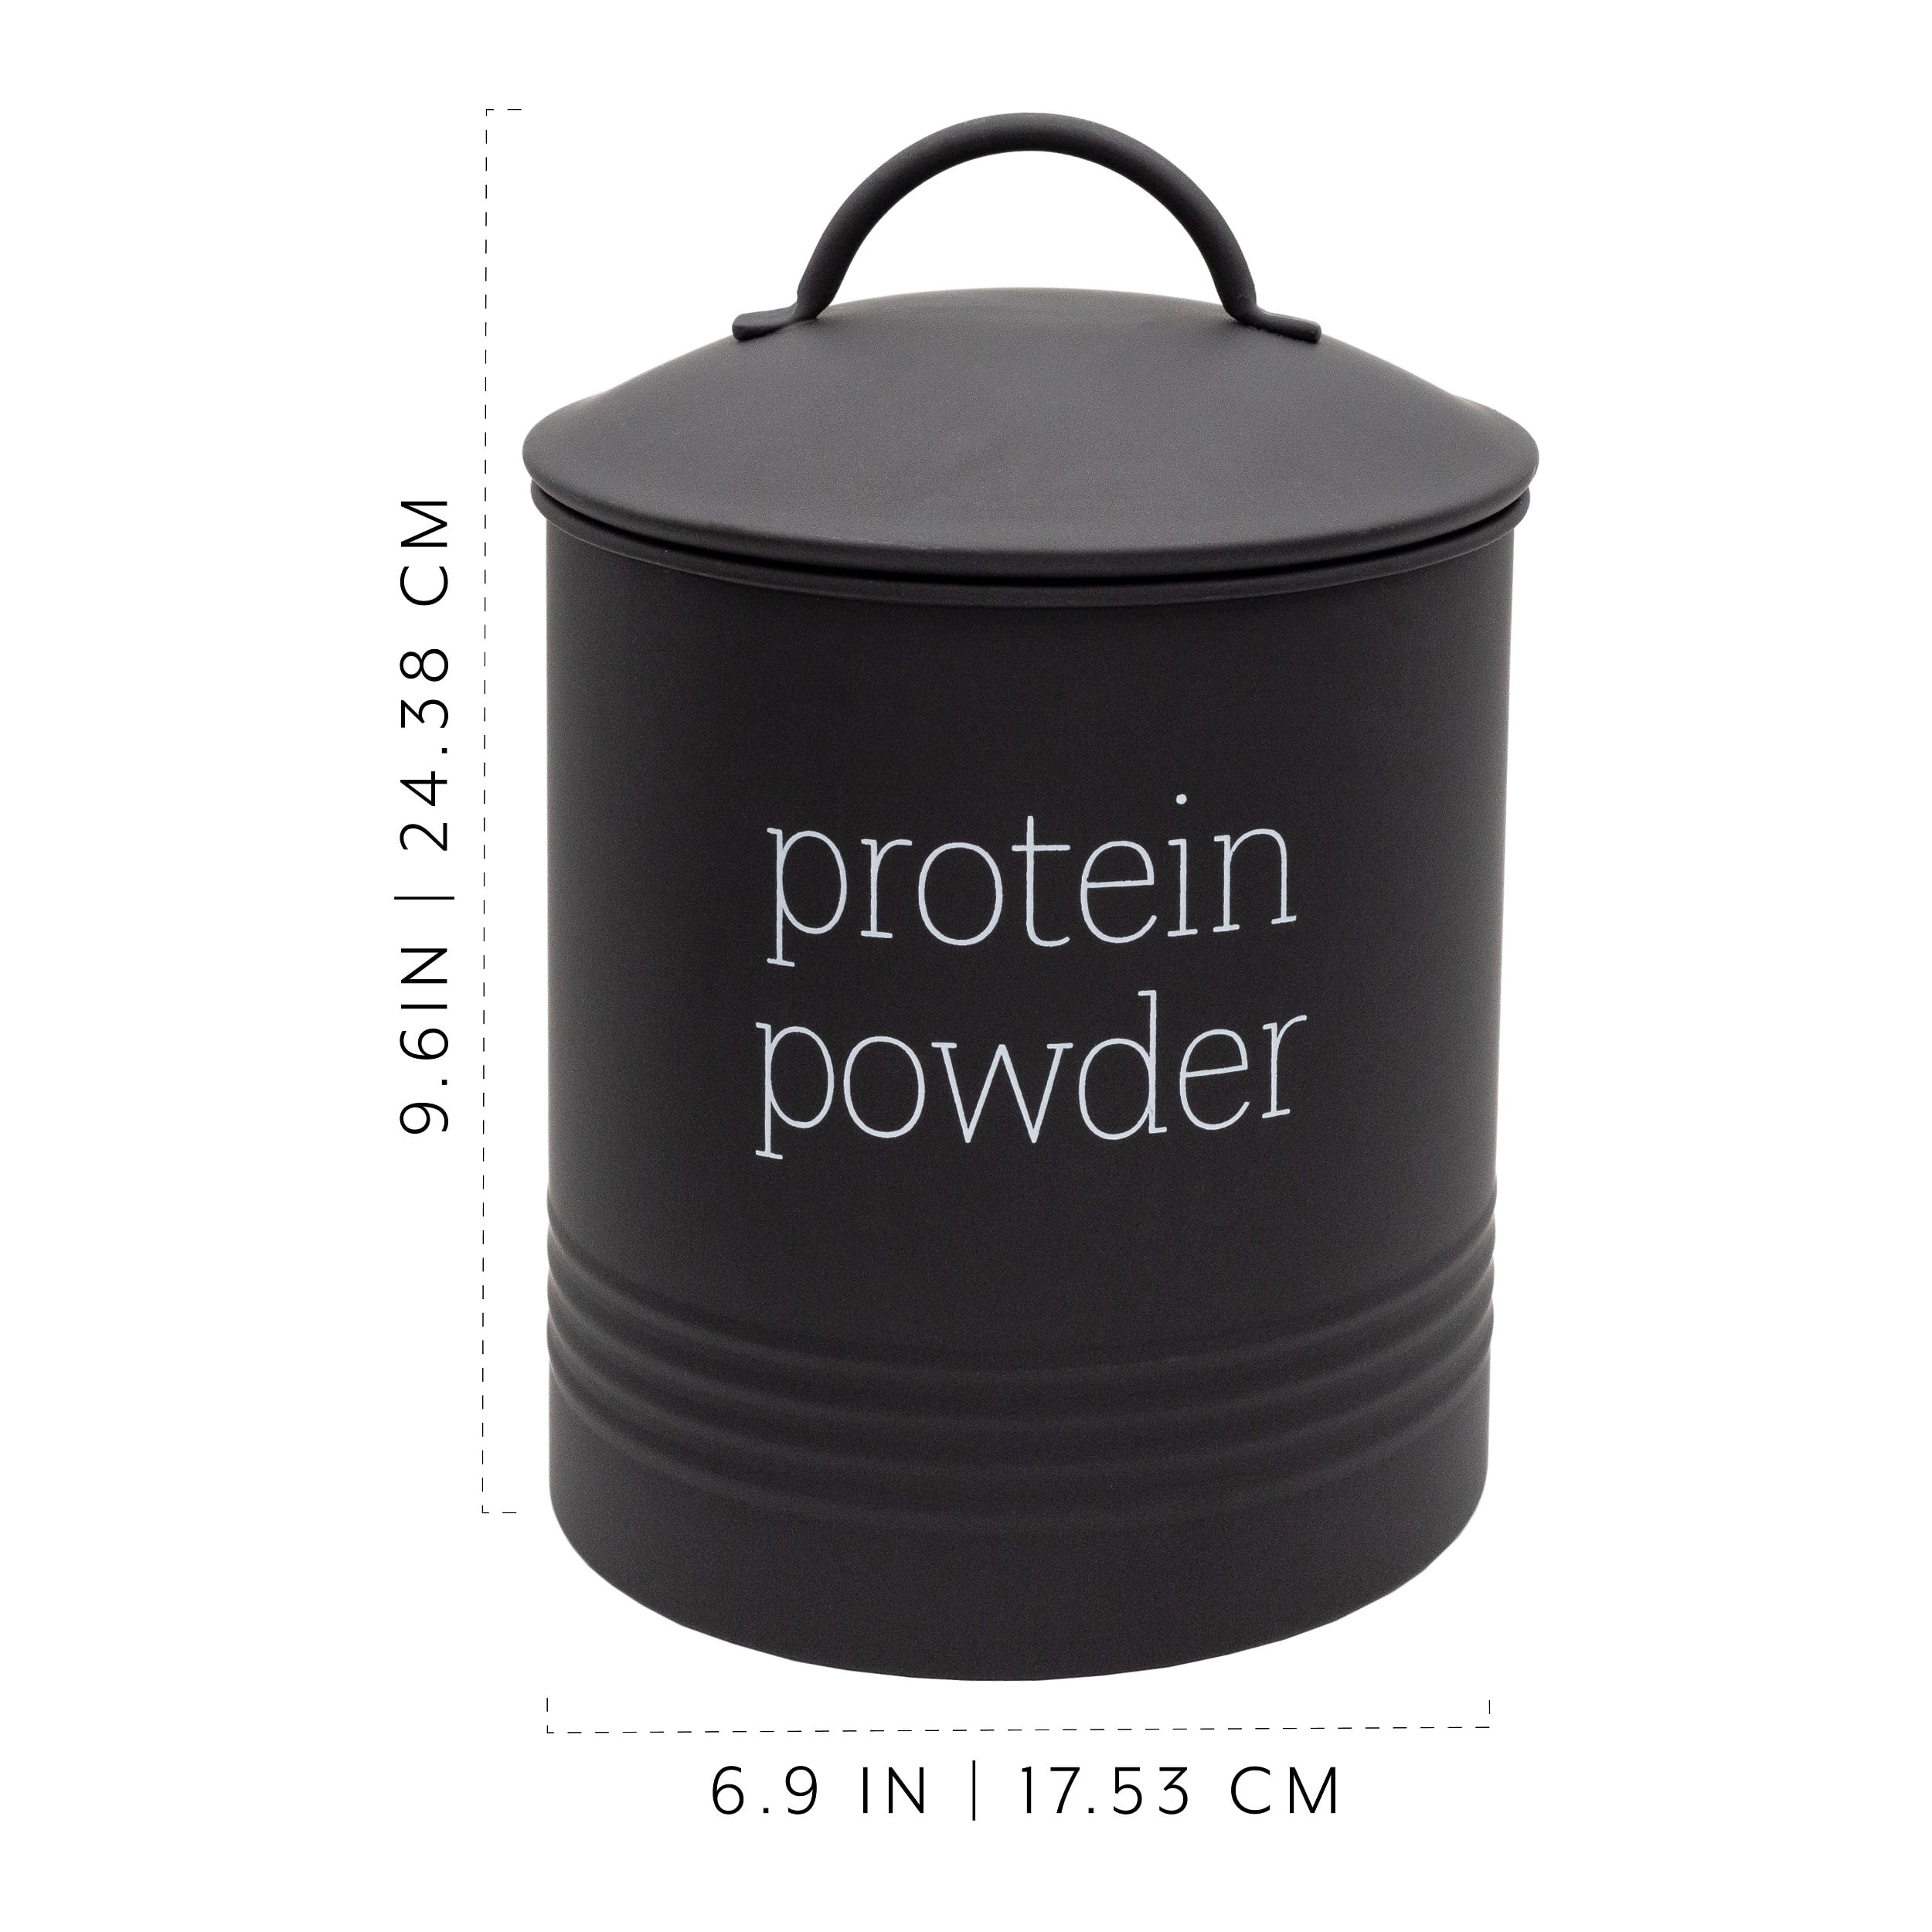 AuldHome Enamelware Protein Powder Canister (Black); Modern Farmhouse Style  Storage for Kitchen